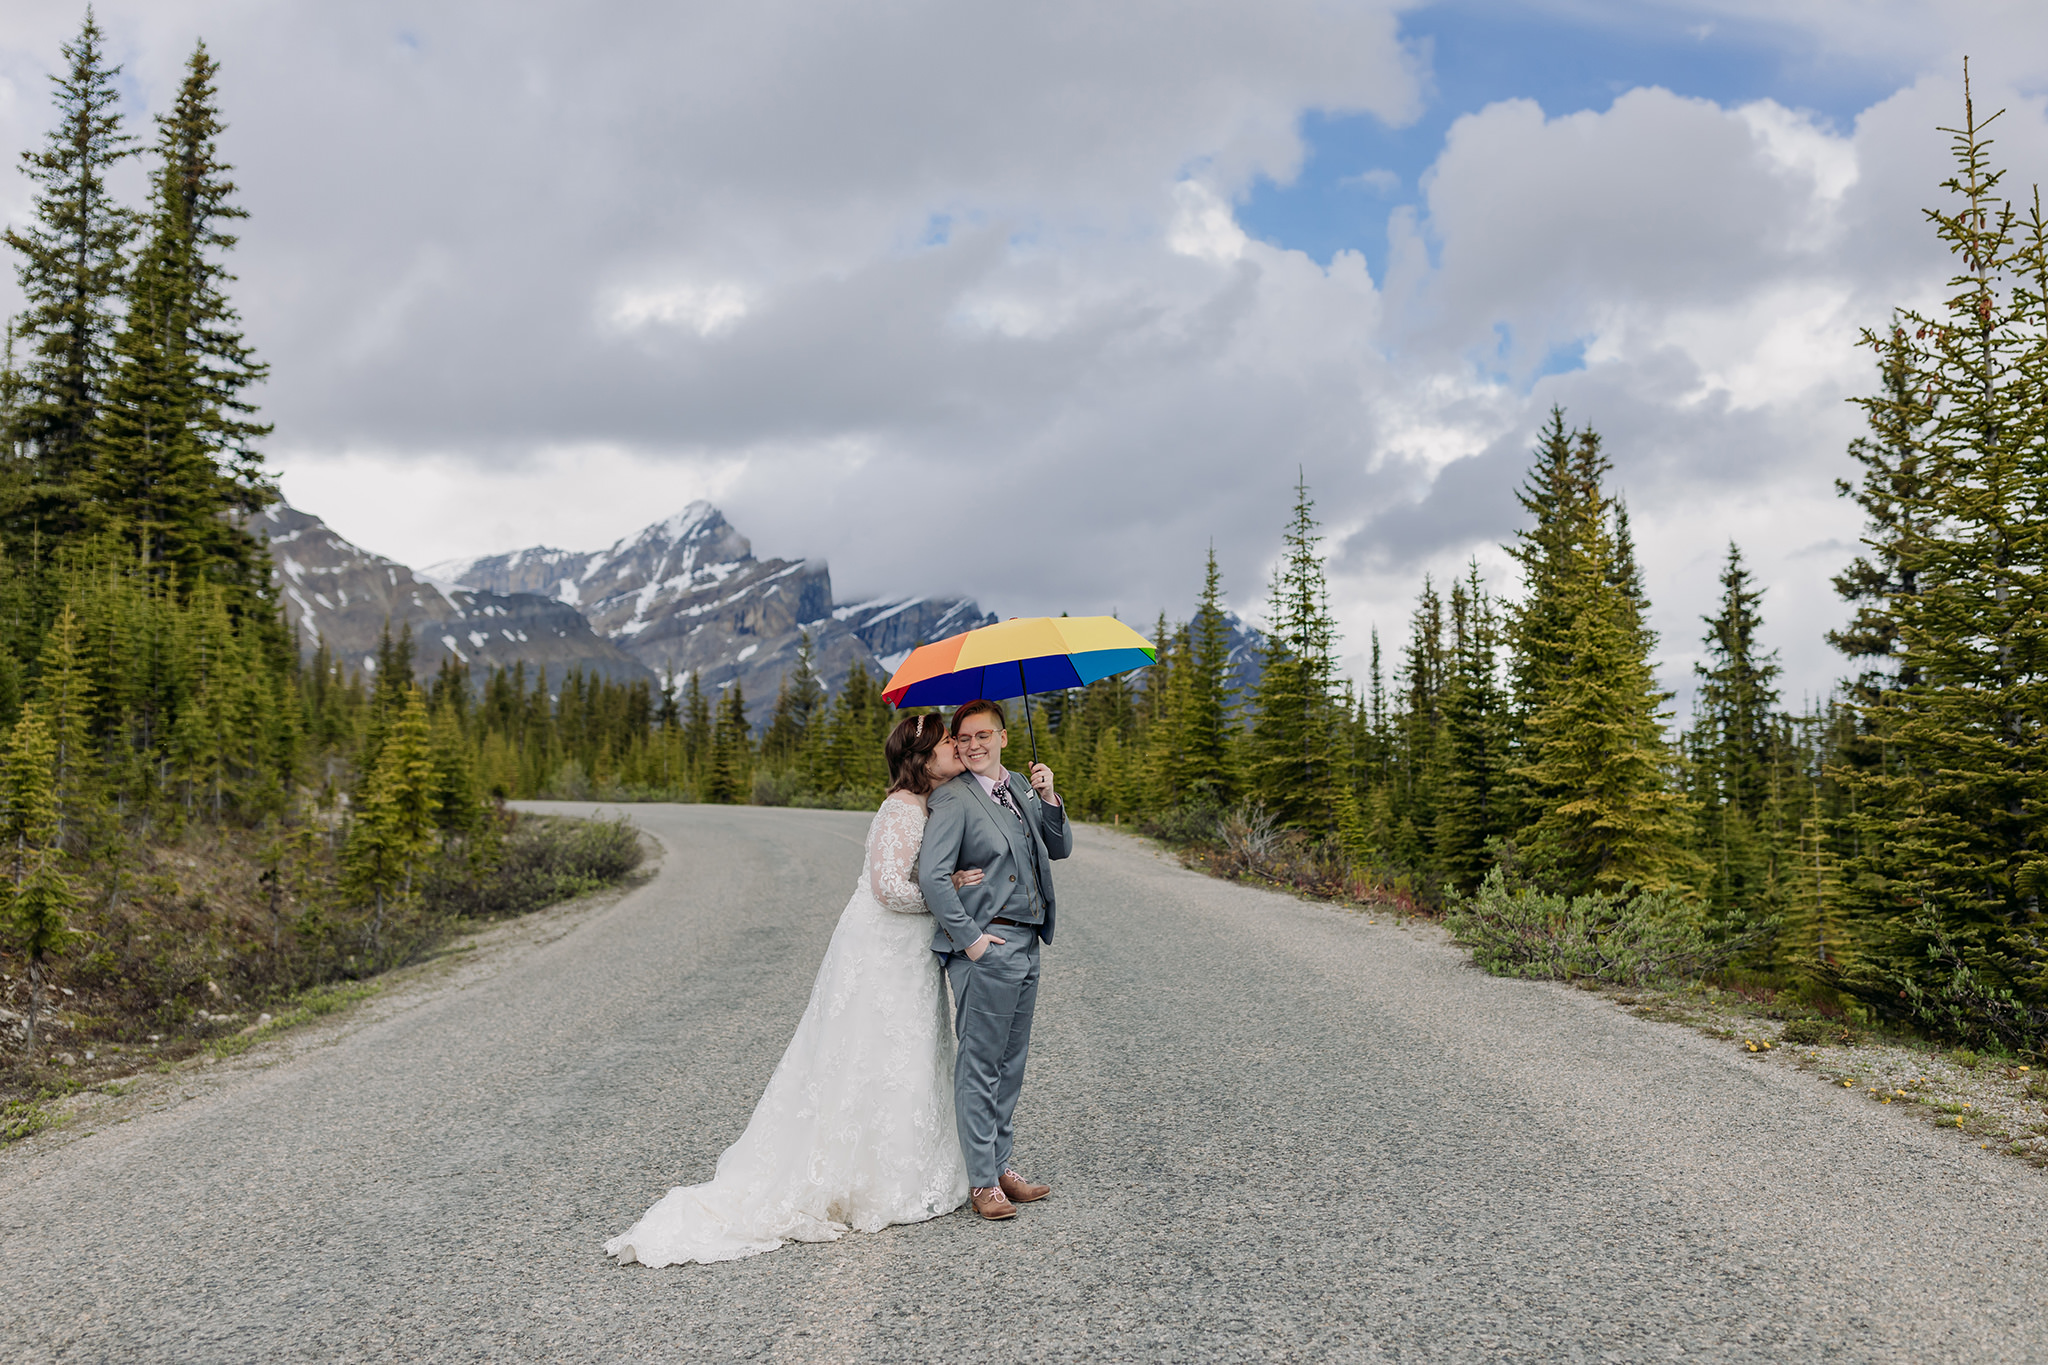 Icefields Parkway adventure session on road to Peyto Lake with same-sex wedding couple with rainbow umbrella days after their wedding. Mountain Wedding portraits photographed by ENV Photography. Gay friendly. LGBTQ friendly wedding & elopement photographer.